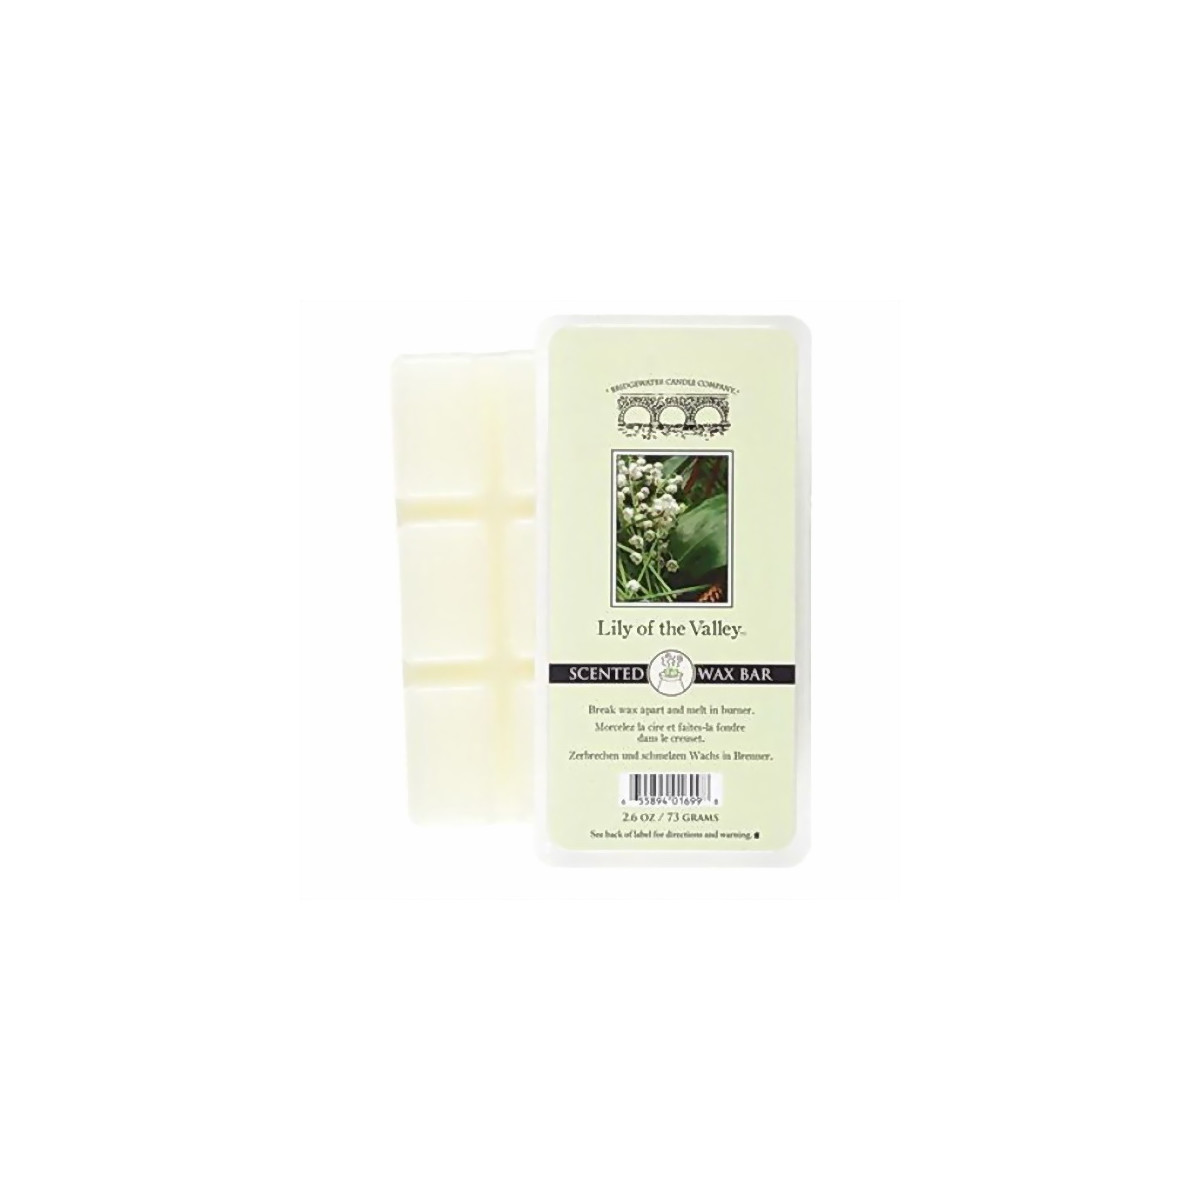 Lily of the Valley - Bridgewater Candle Company Wax Bar